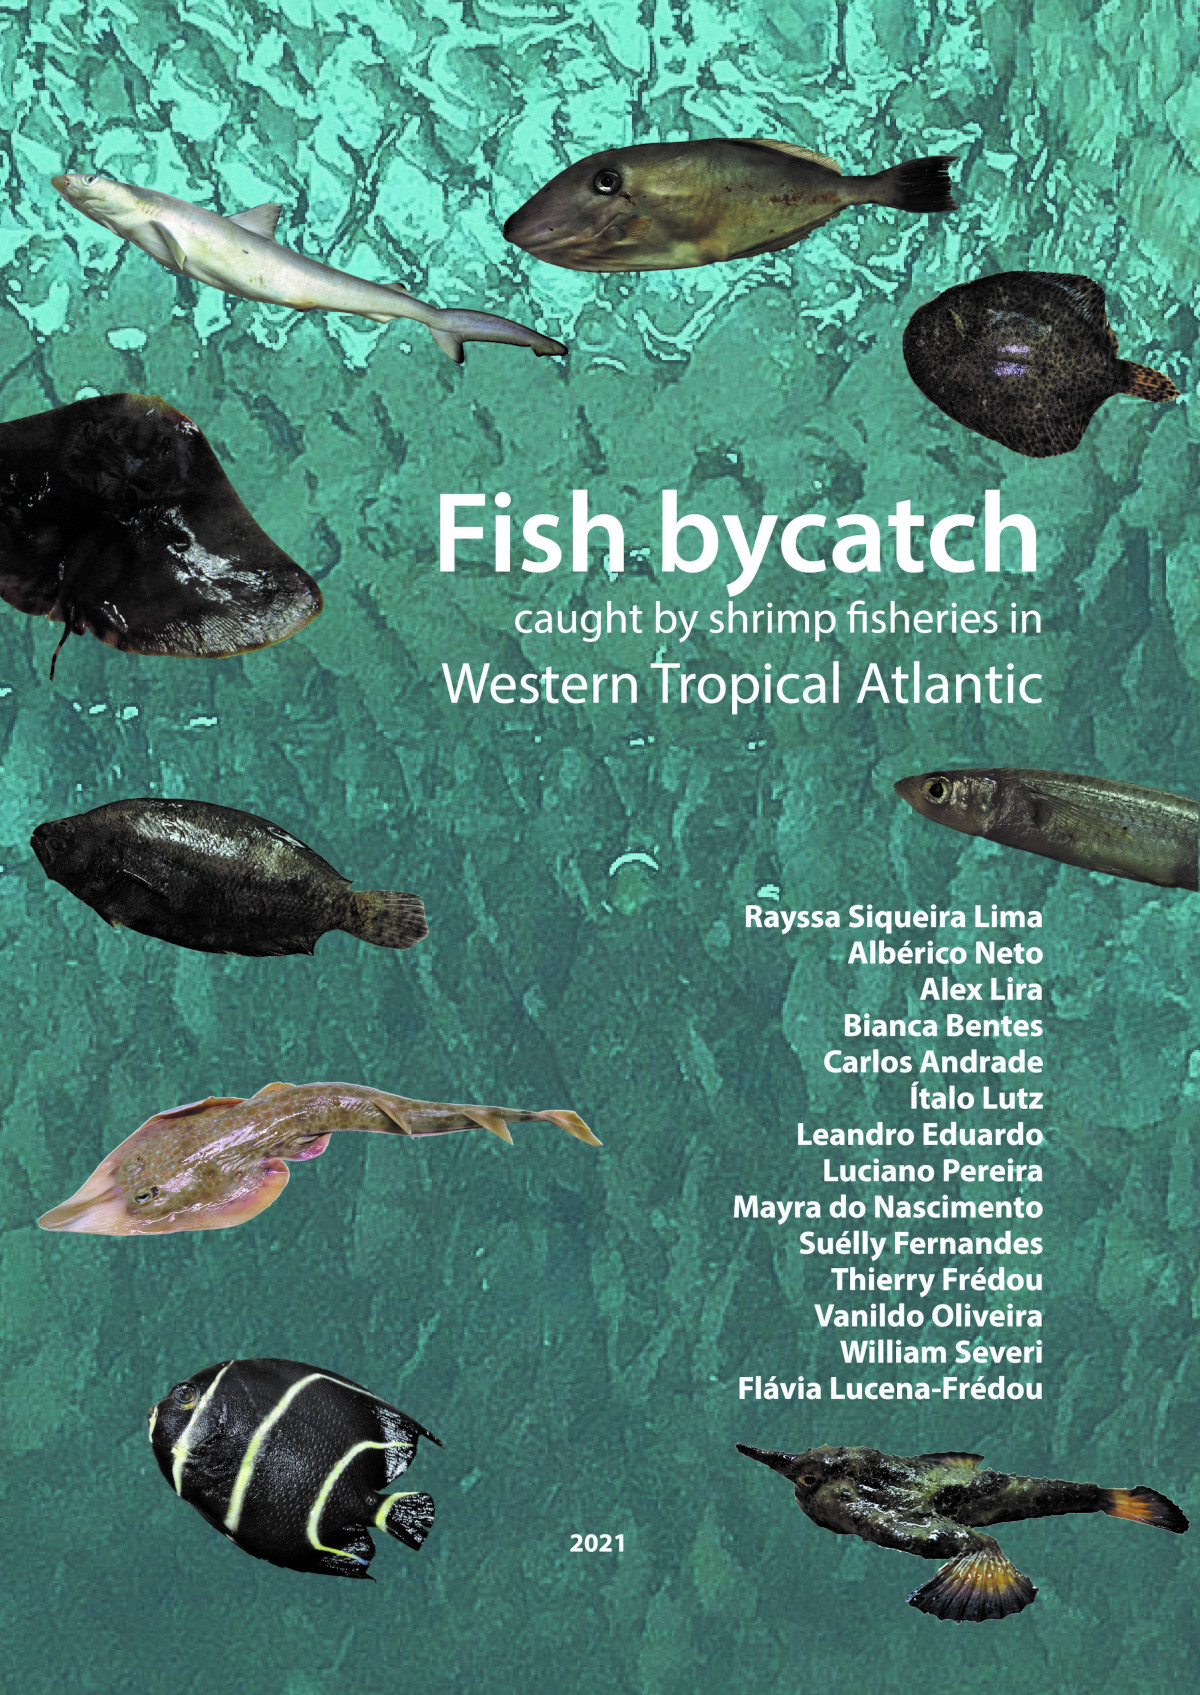 Fish bycatch caught by shrimp fisheries in Western Tropical Atlantic